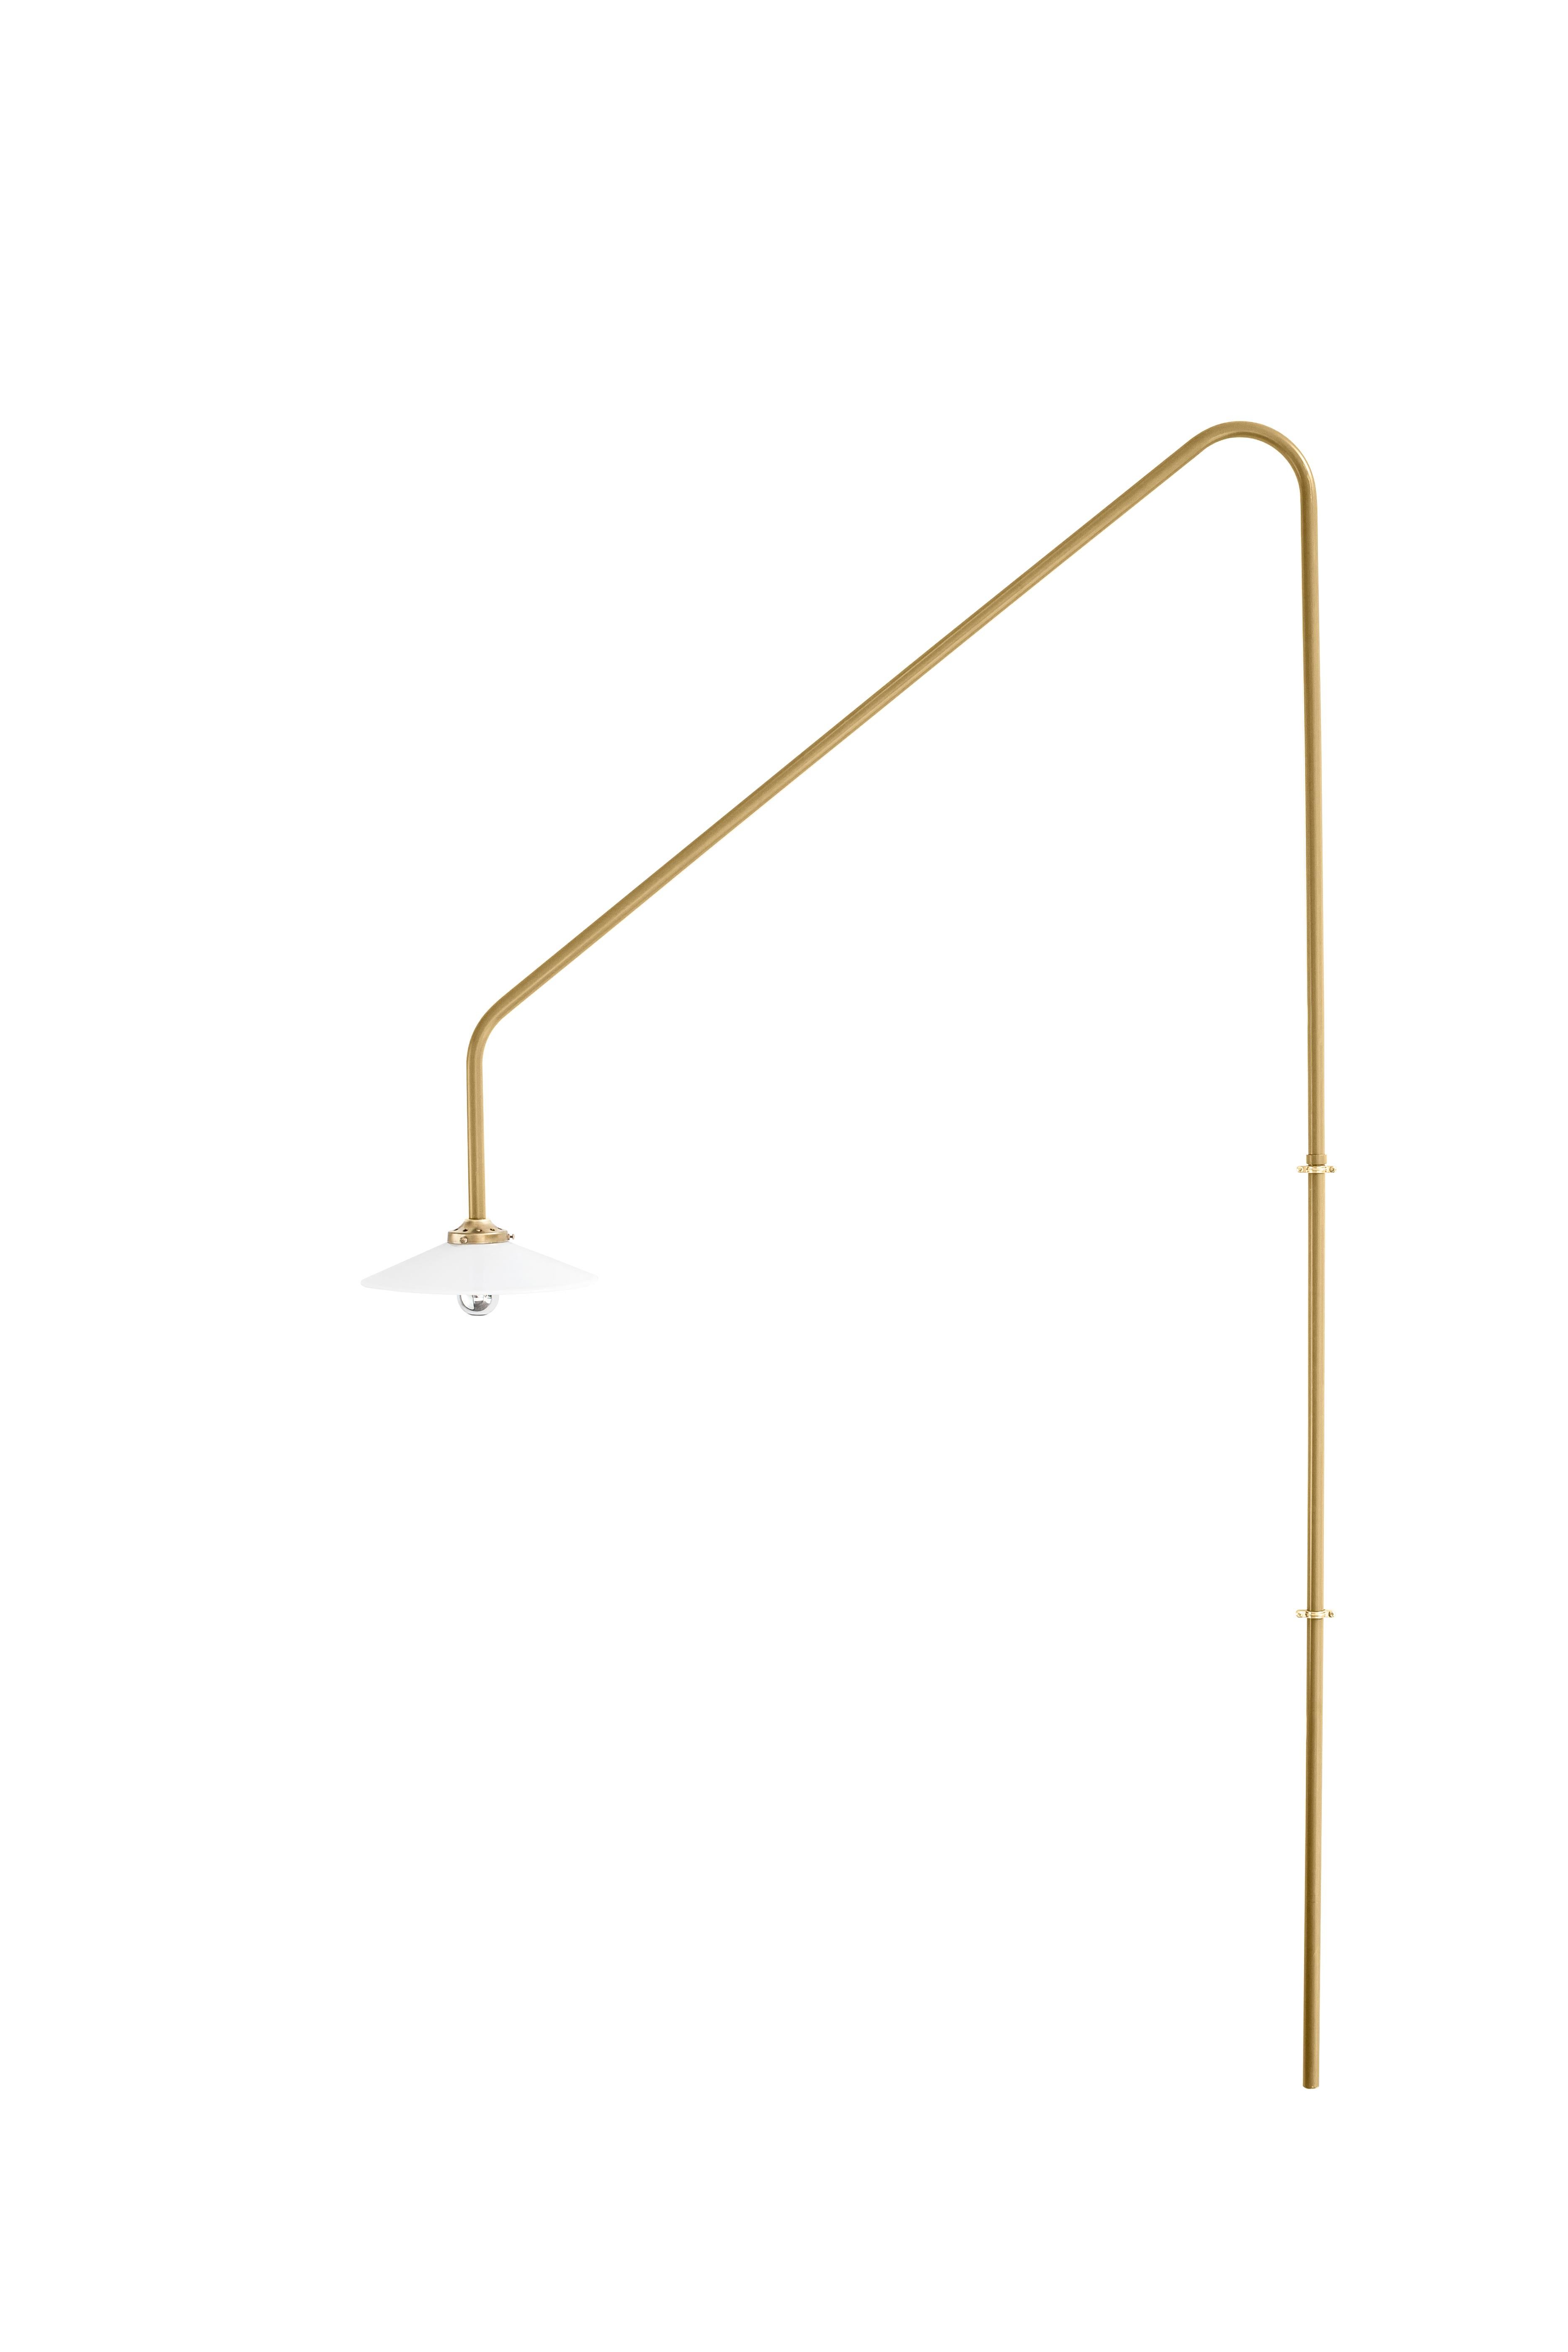 Organic Modern Contemporary Hanging Lamp N°4 by Muller Van Severen x Valerie Objects, Brass For Sale